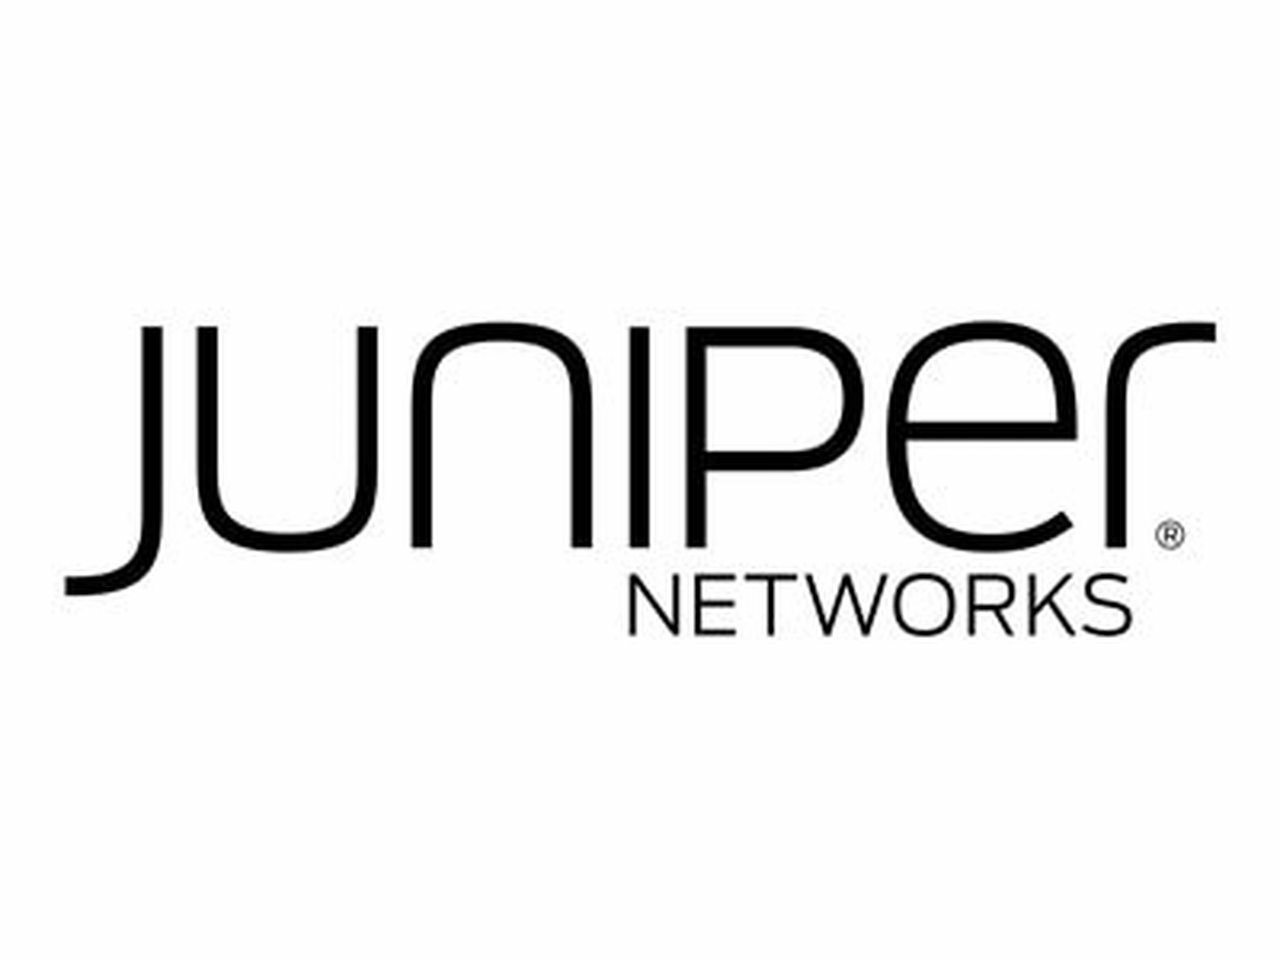 Juniper Care Software Advantage Support for CPP-10G